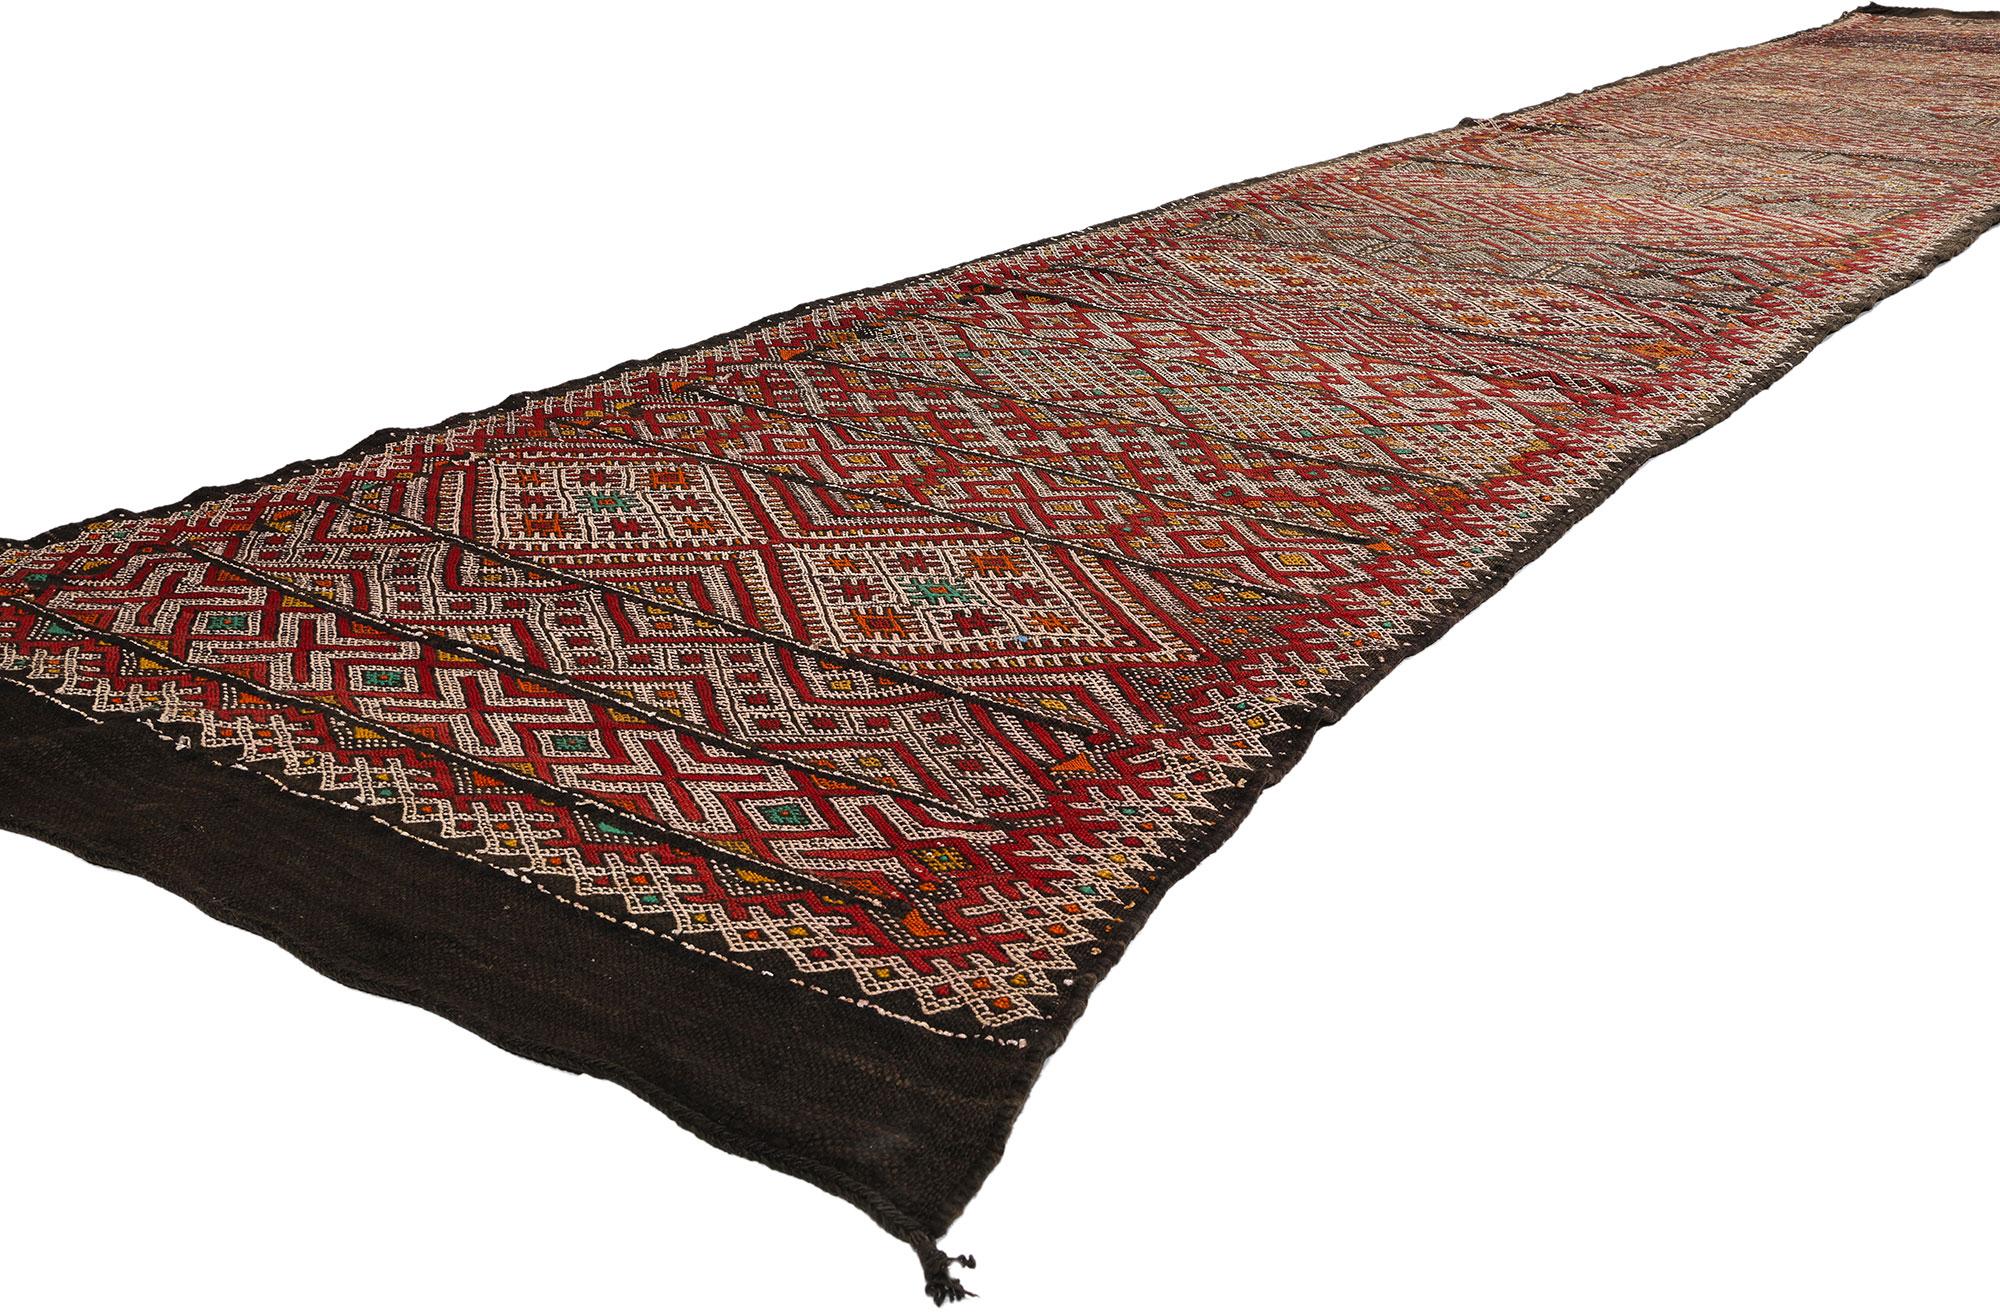 21842 Vintage Zemmour Moroccan Kilim Rug Runner, 03'07 x 20'04. Introducing our exquisite handwoven wool hanbel rug, a captivating extra-long Moroccan kilim runner hailing from the skilled artisans of the Zemmour Tribe in the Middle Atlas Mountains